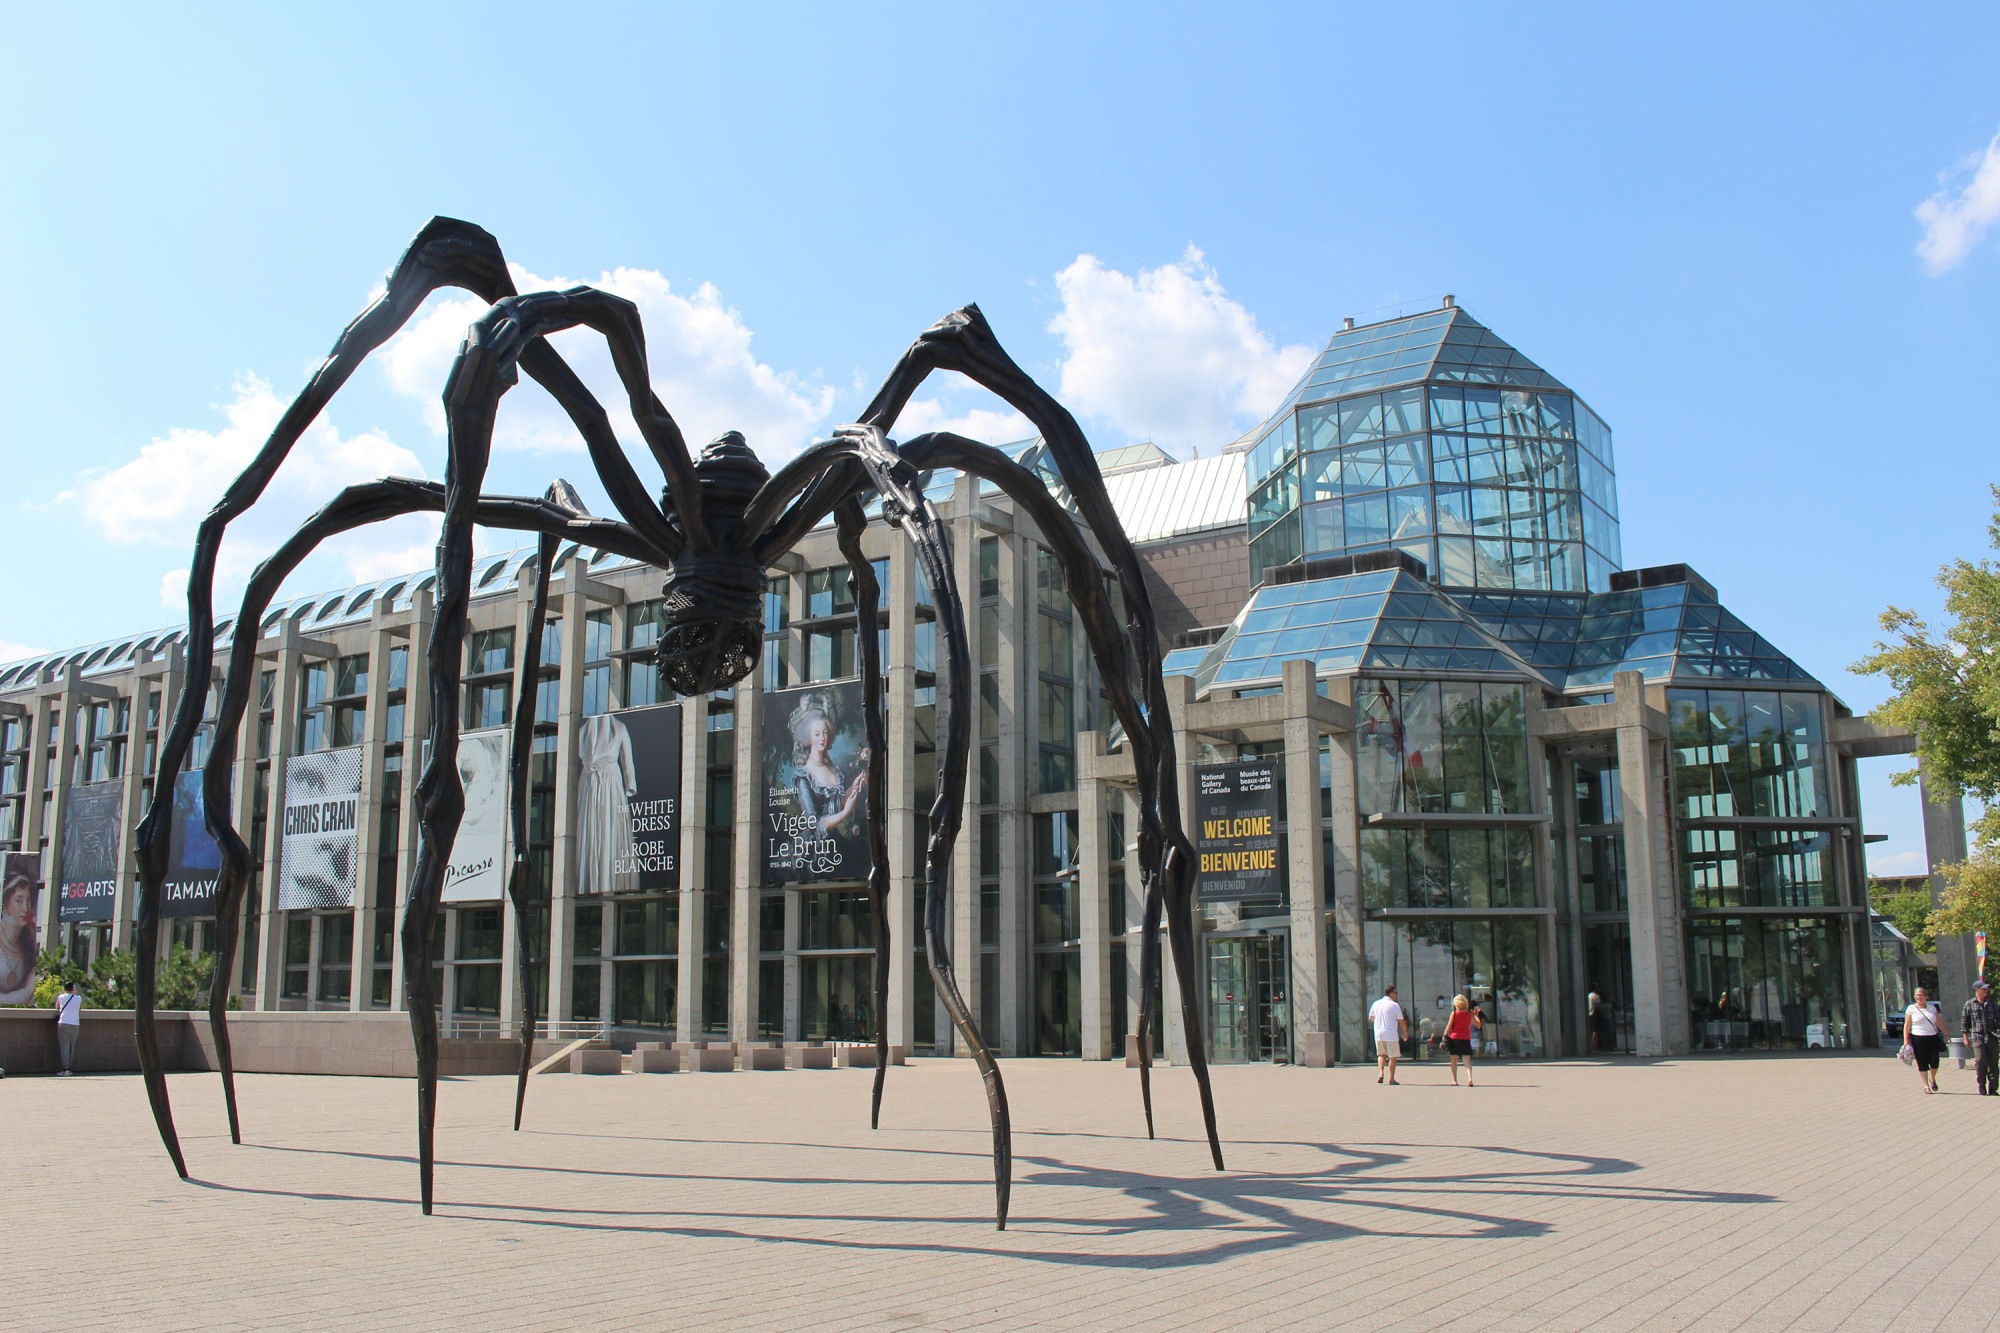 Louise Bourgeois' monster bronze spider, "Maman,"  lures visitors into the National Gallery of Canada, among the nation's finest art museums. (Alan Solomon/Chicago Tribune/Tribune News Service via Getty Images)